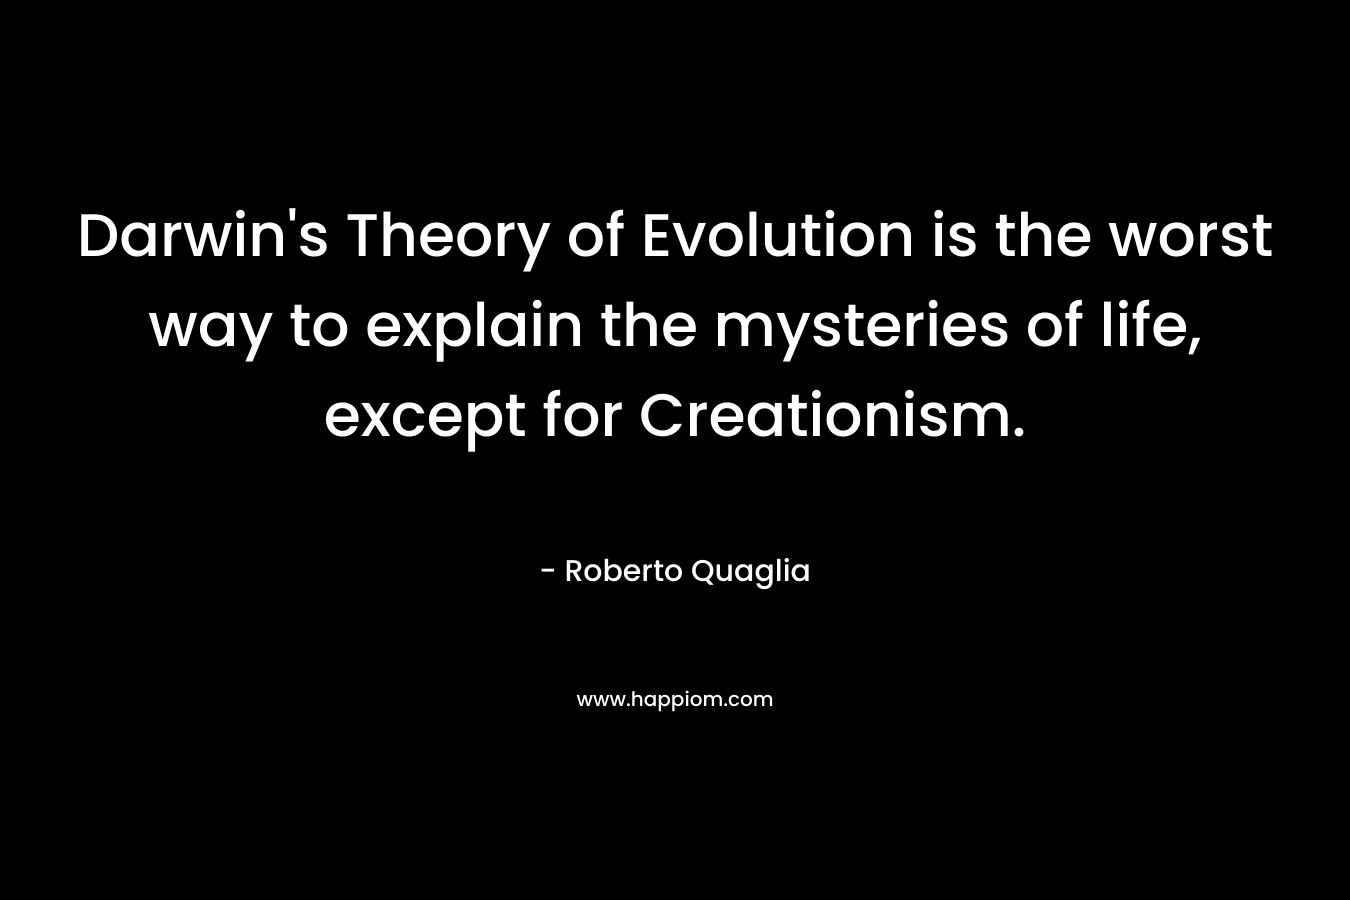 Darwin's Theory of Evolution is the worst way to explain the mysteries of life, except for Creationism.